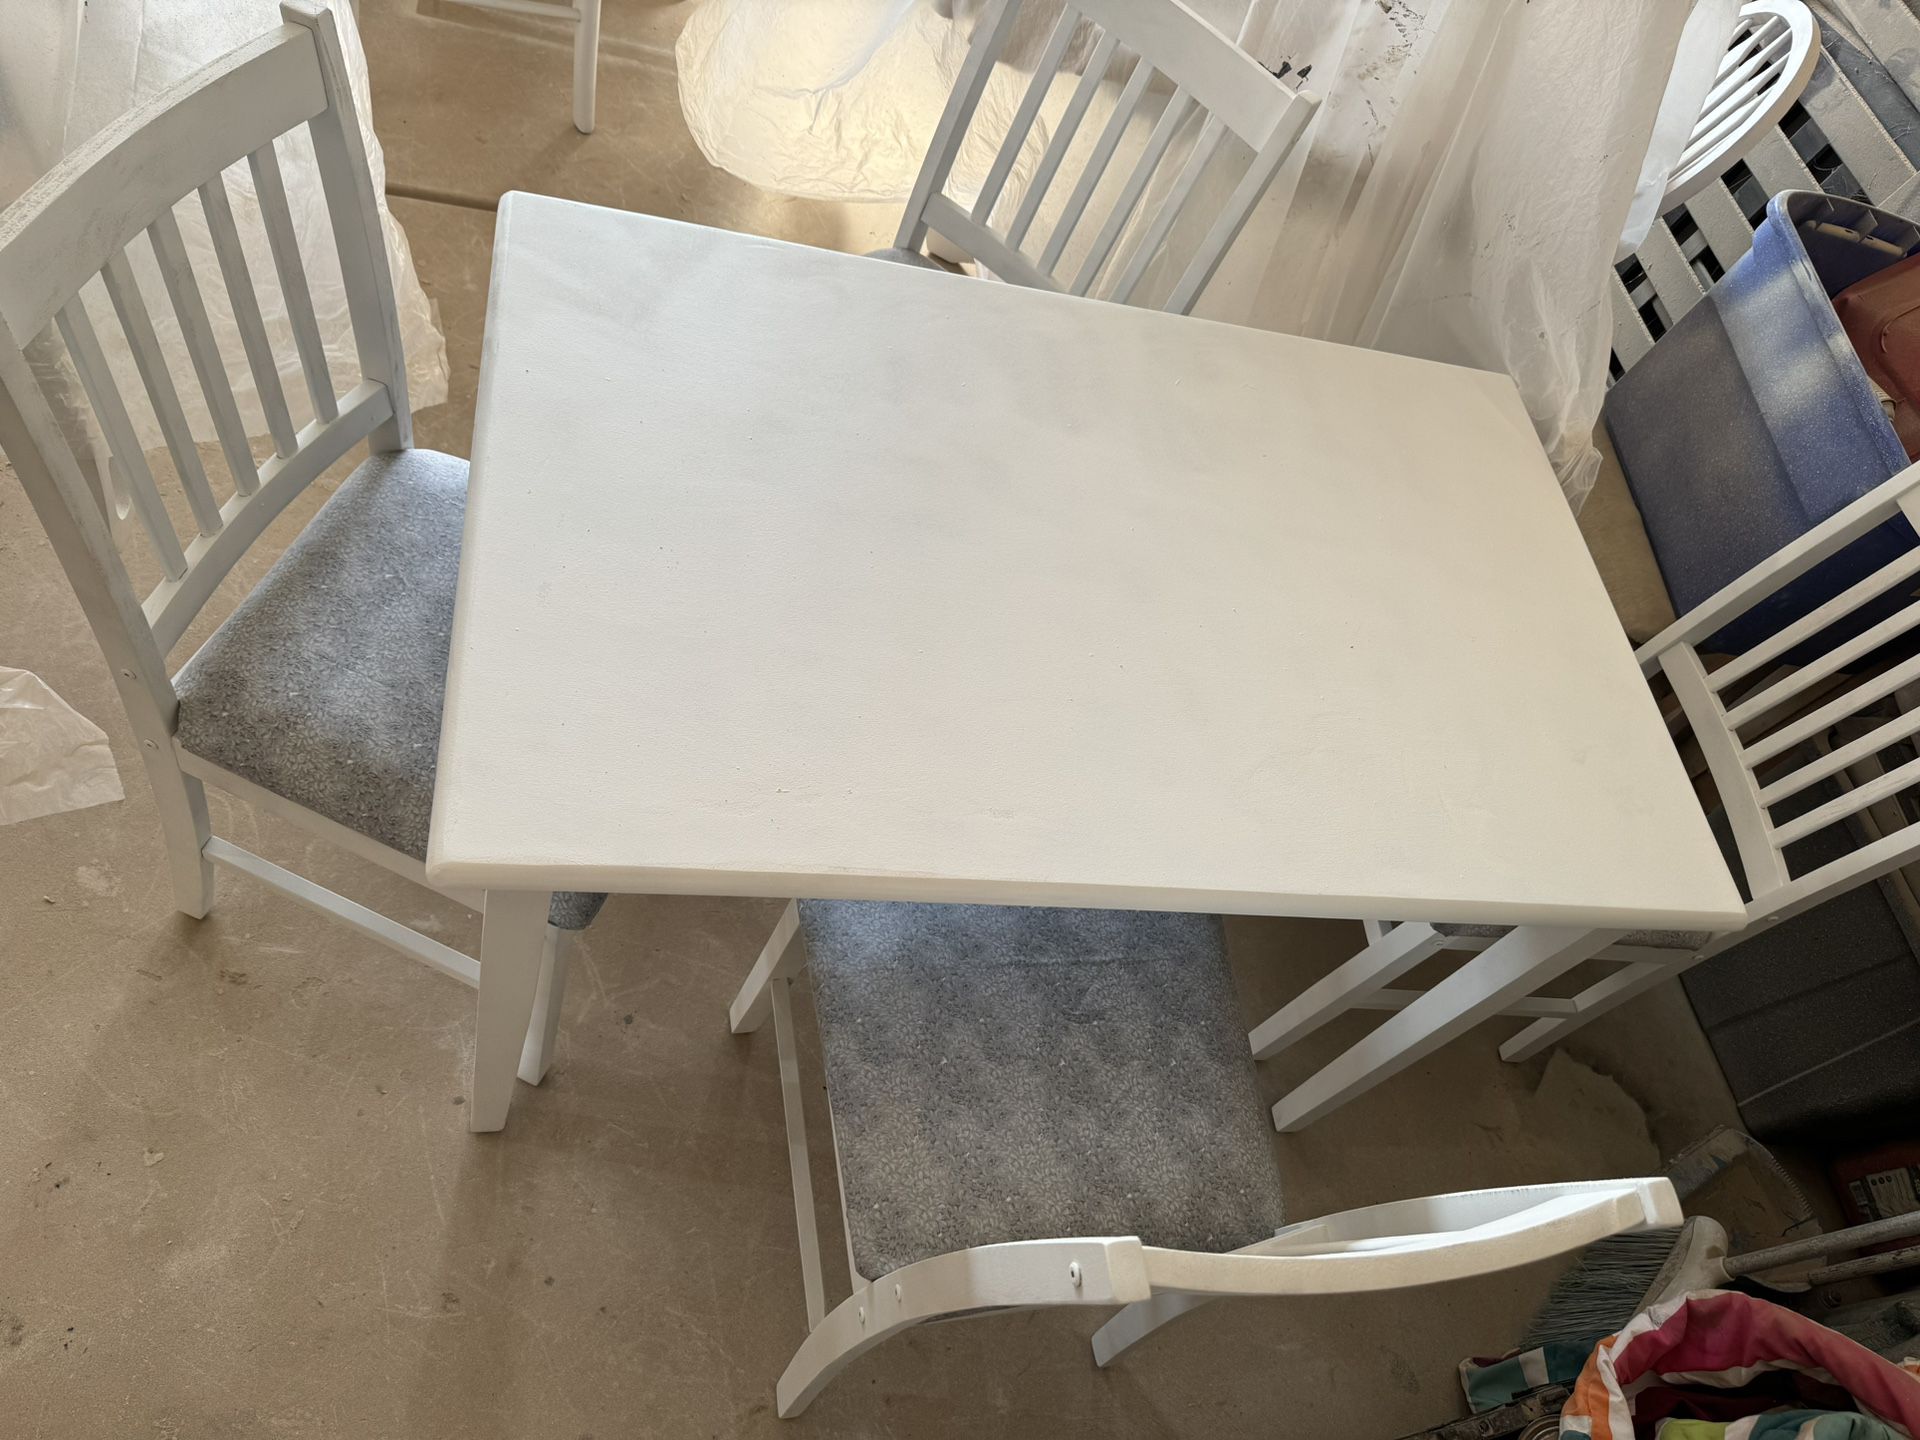 Small Kitchen (or Child’s) Table Set